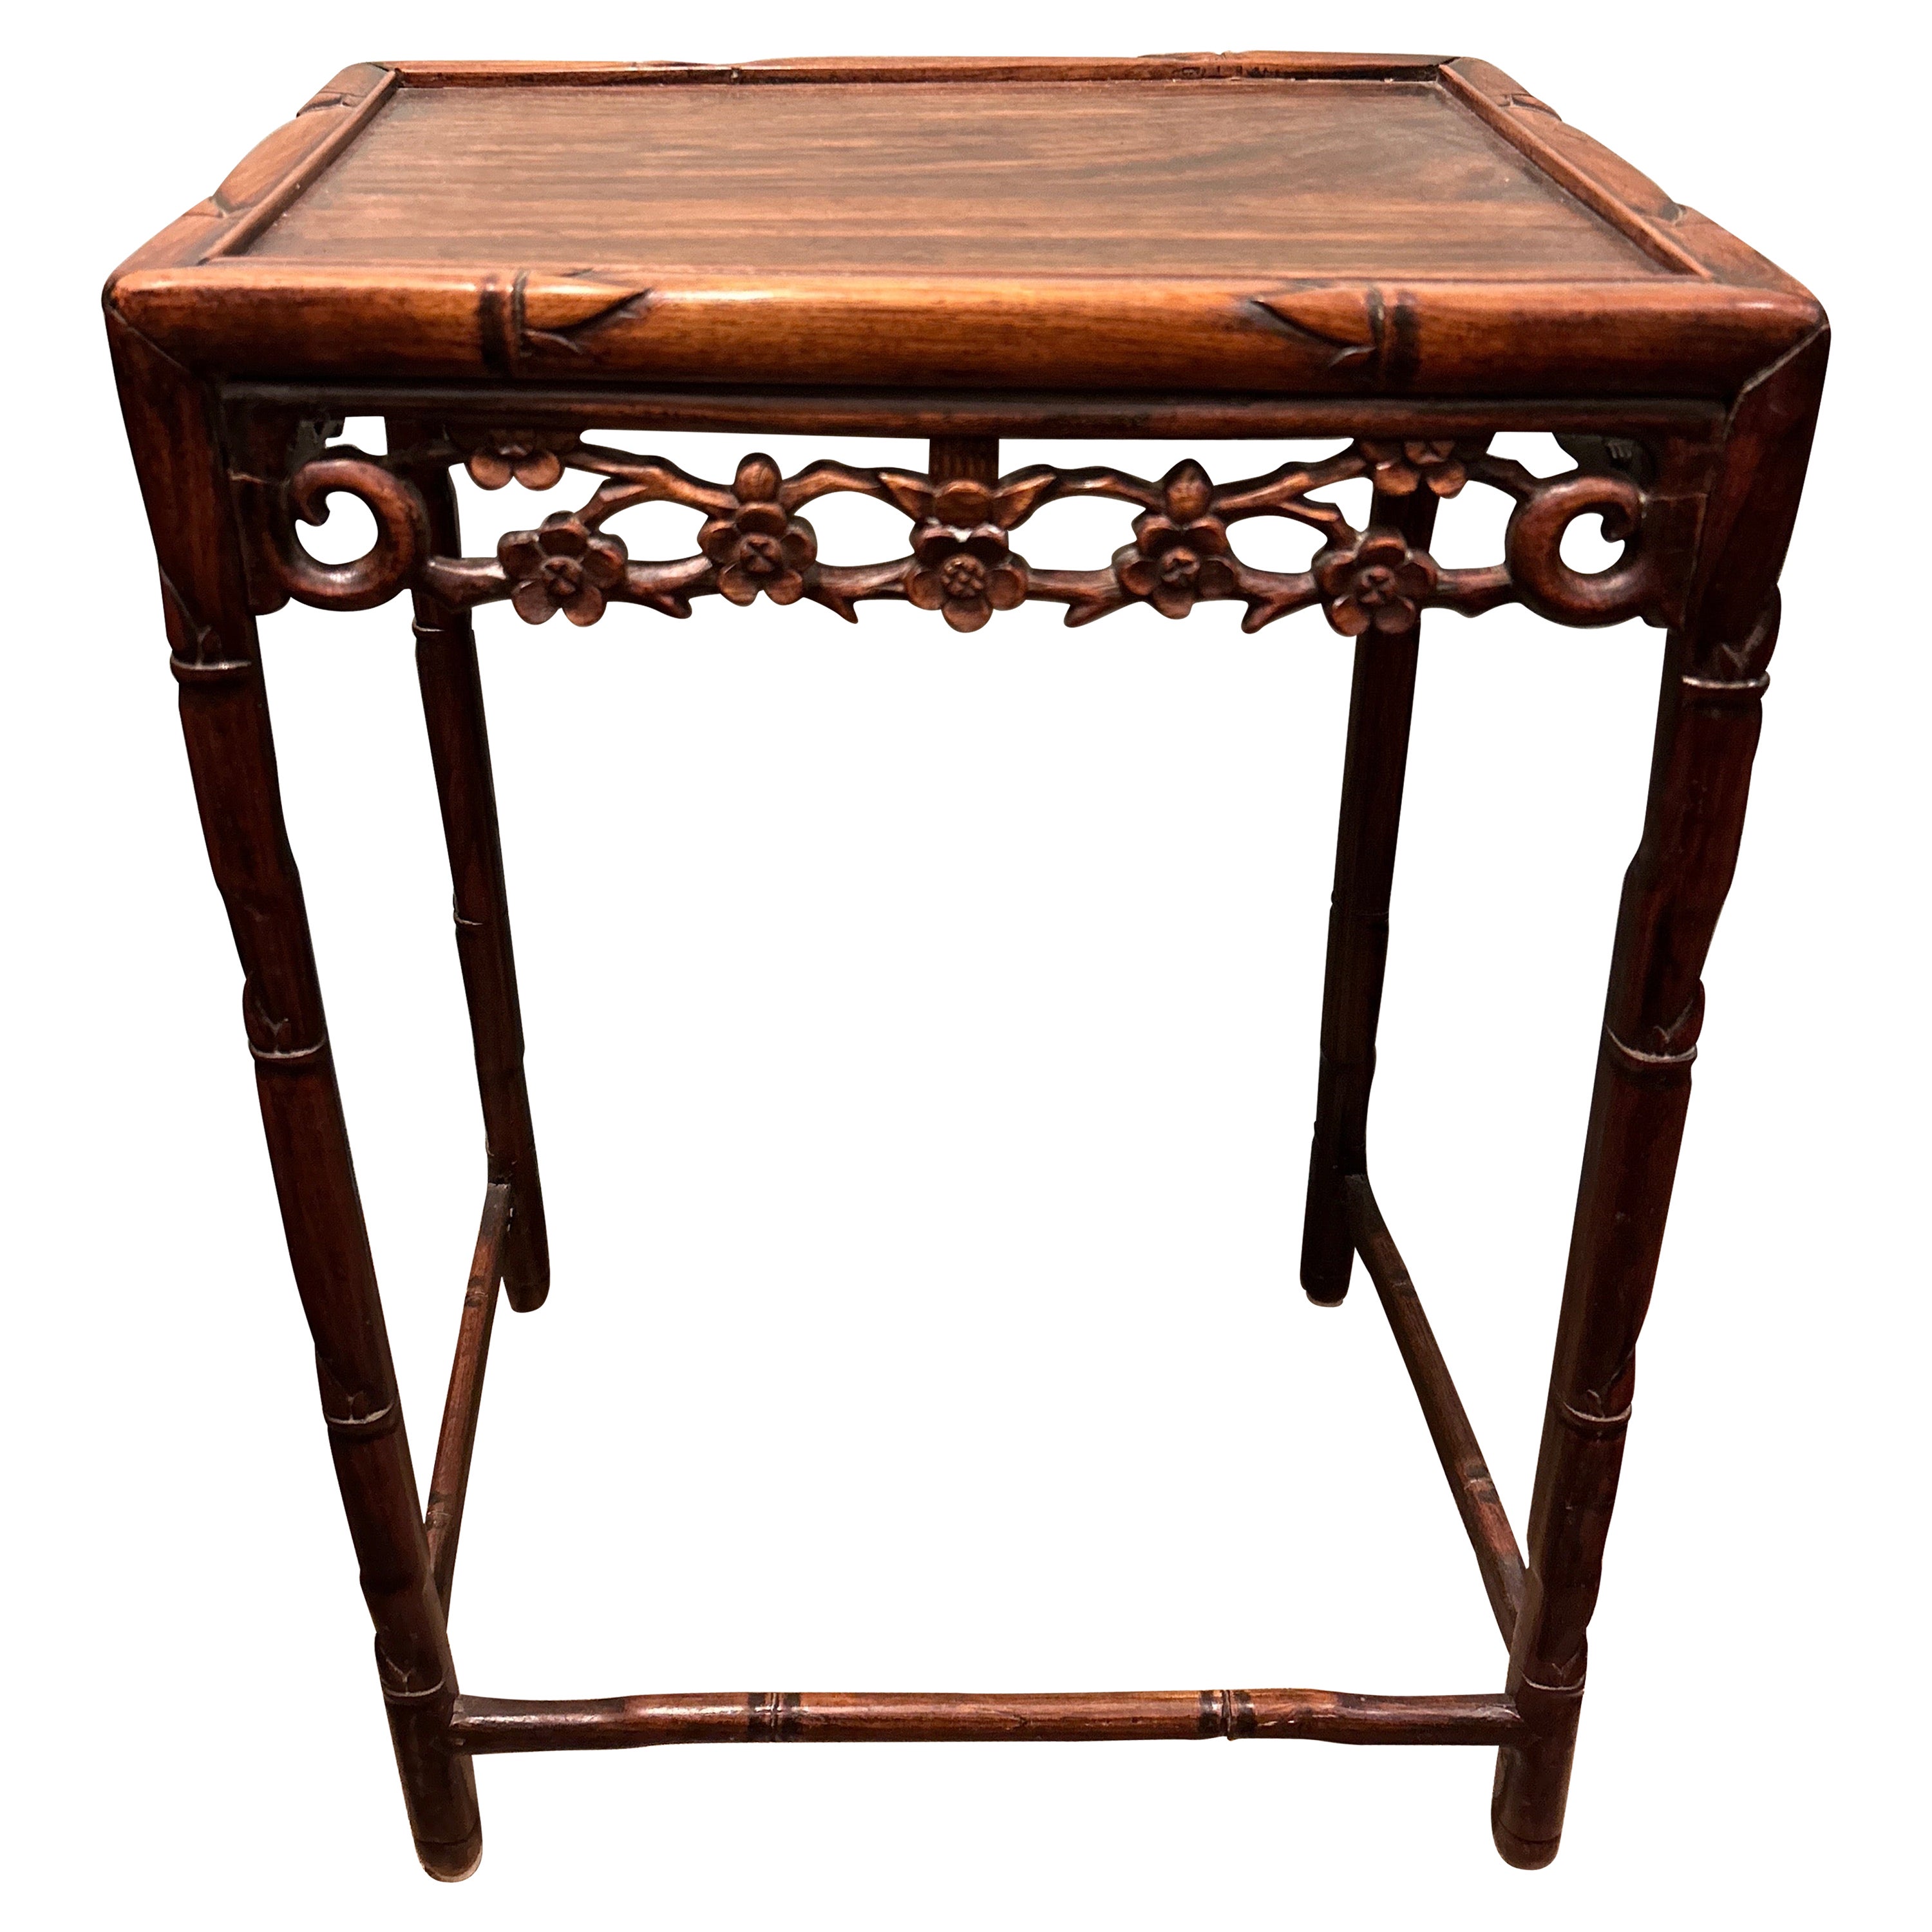 Late Qing Dynasty Rosewood Export Side Table Carved With Floral Bamboo Theme